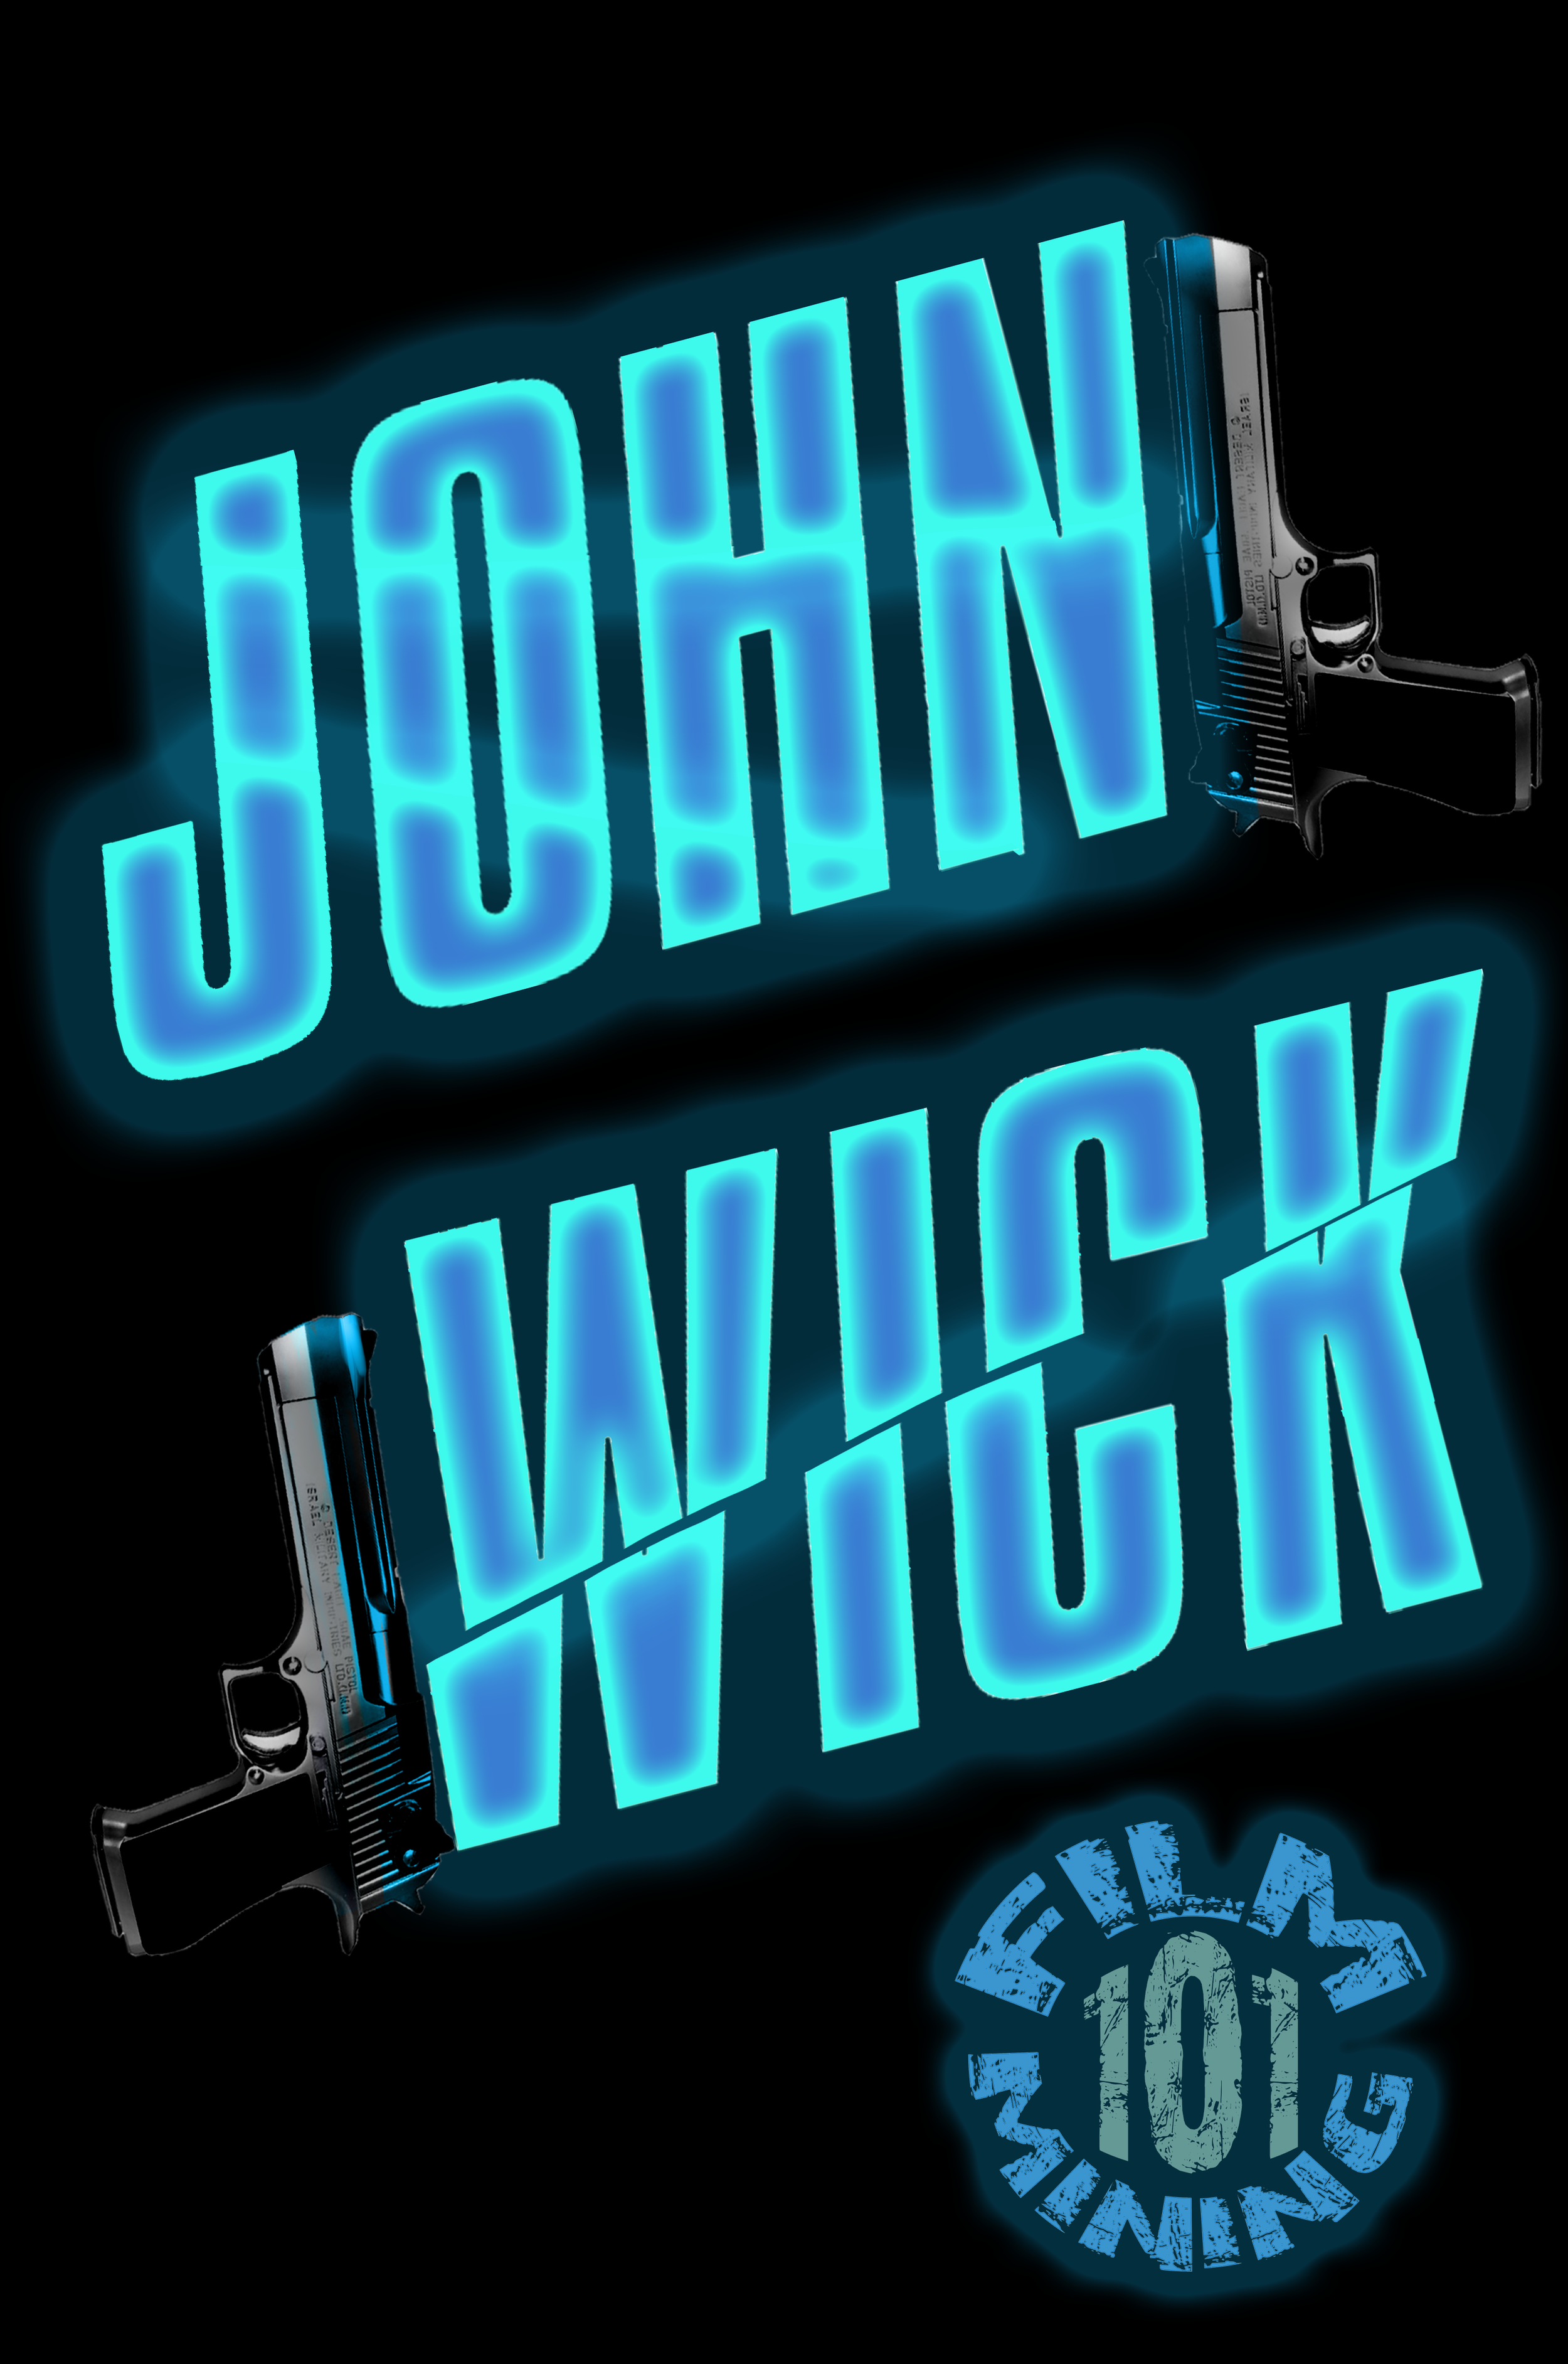 Everything You Need to Know About John Wick: Chapter 2 Movie (2017)